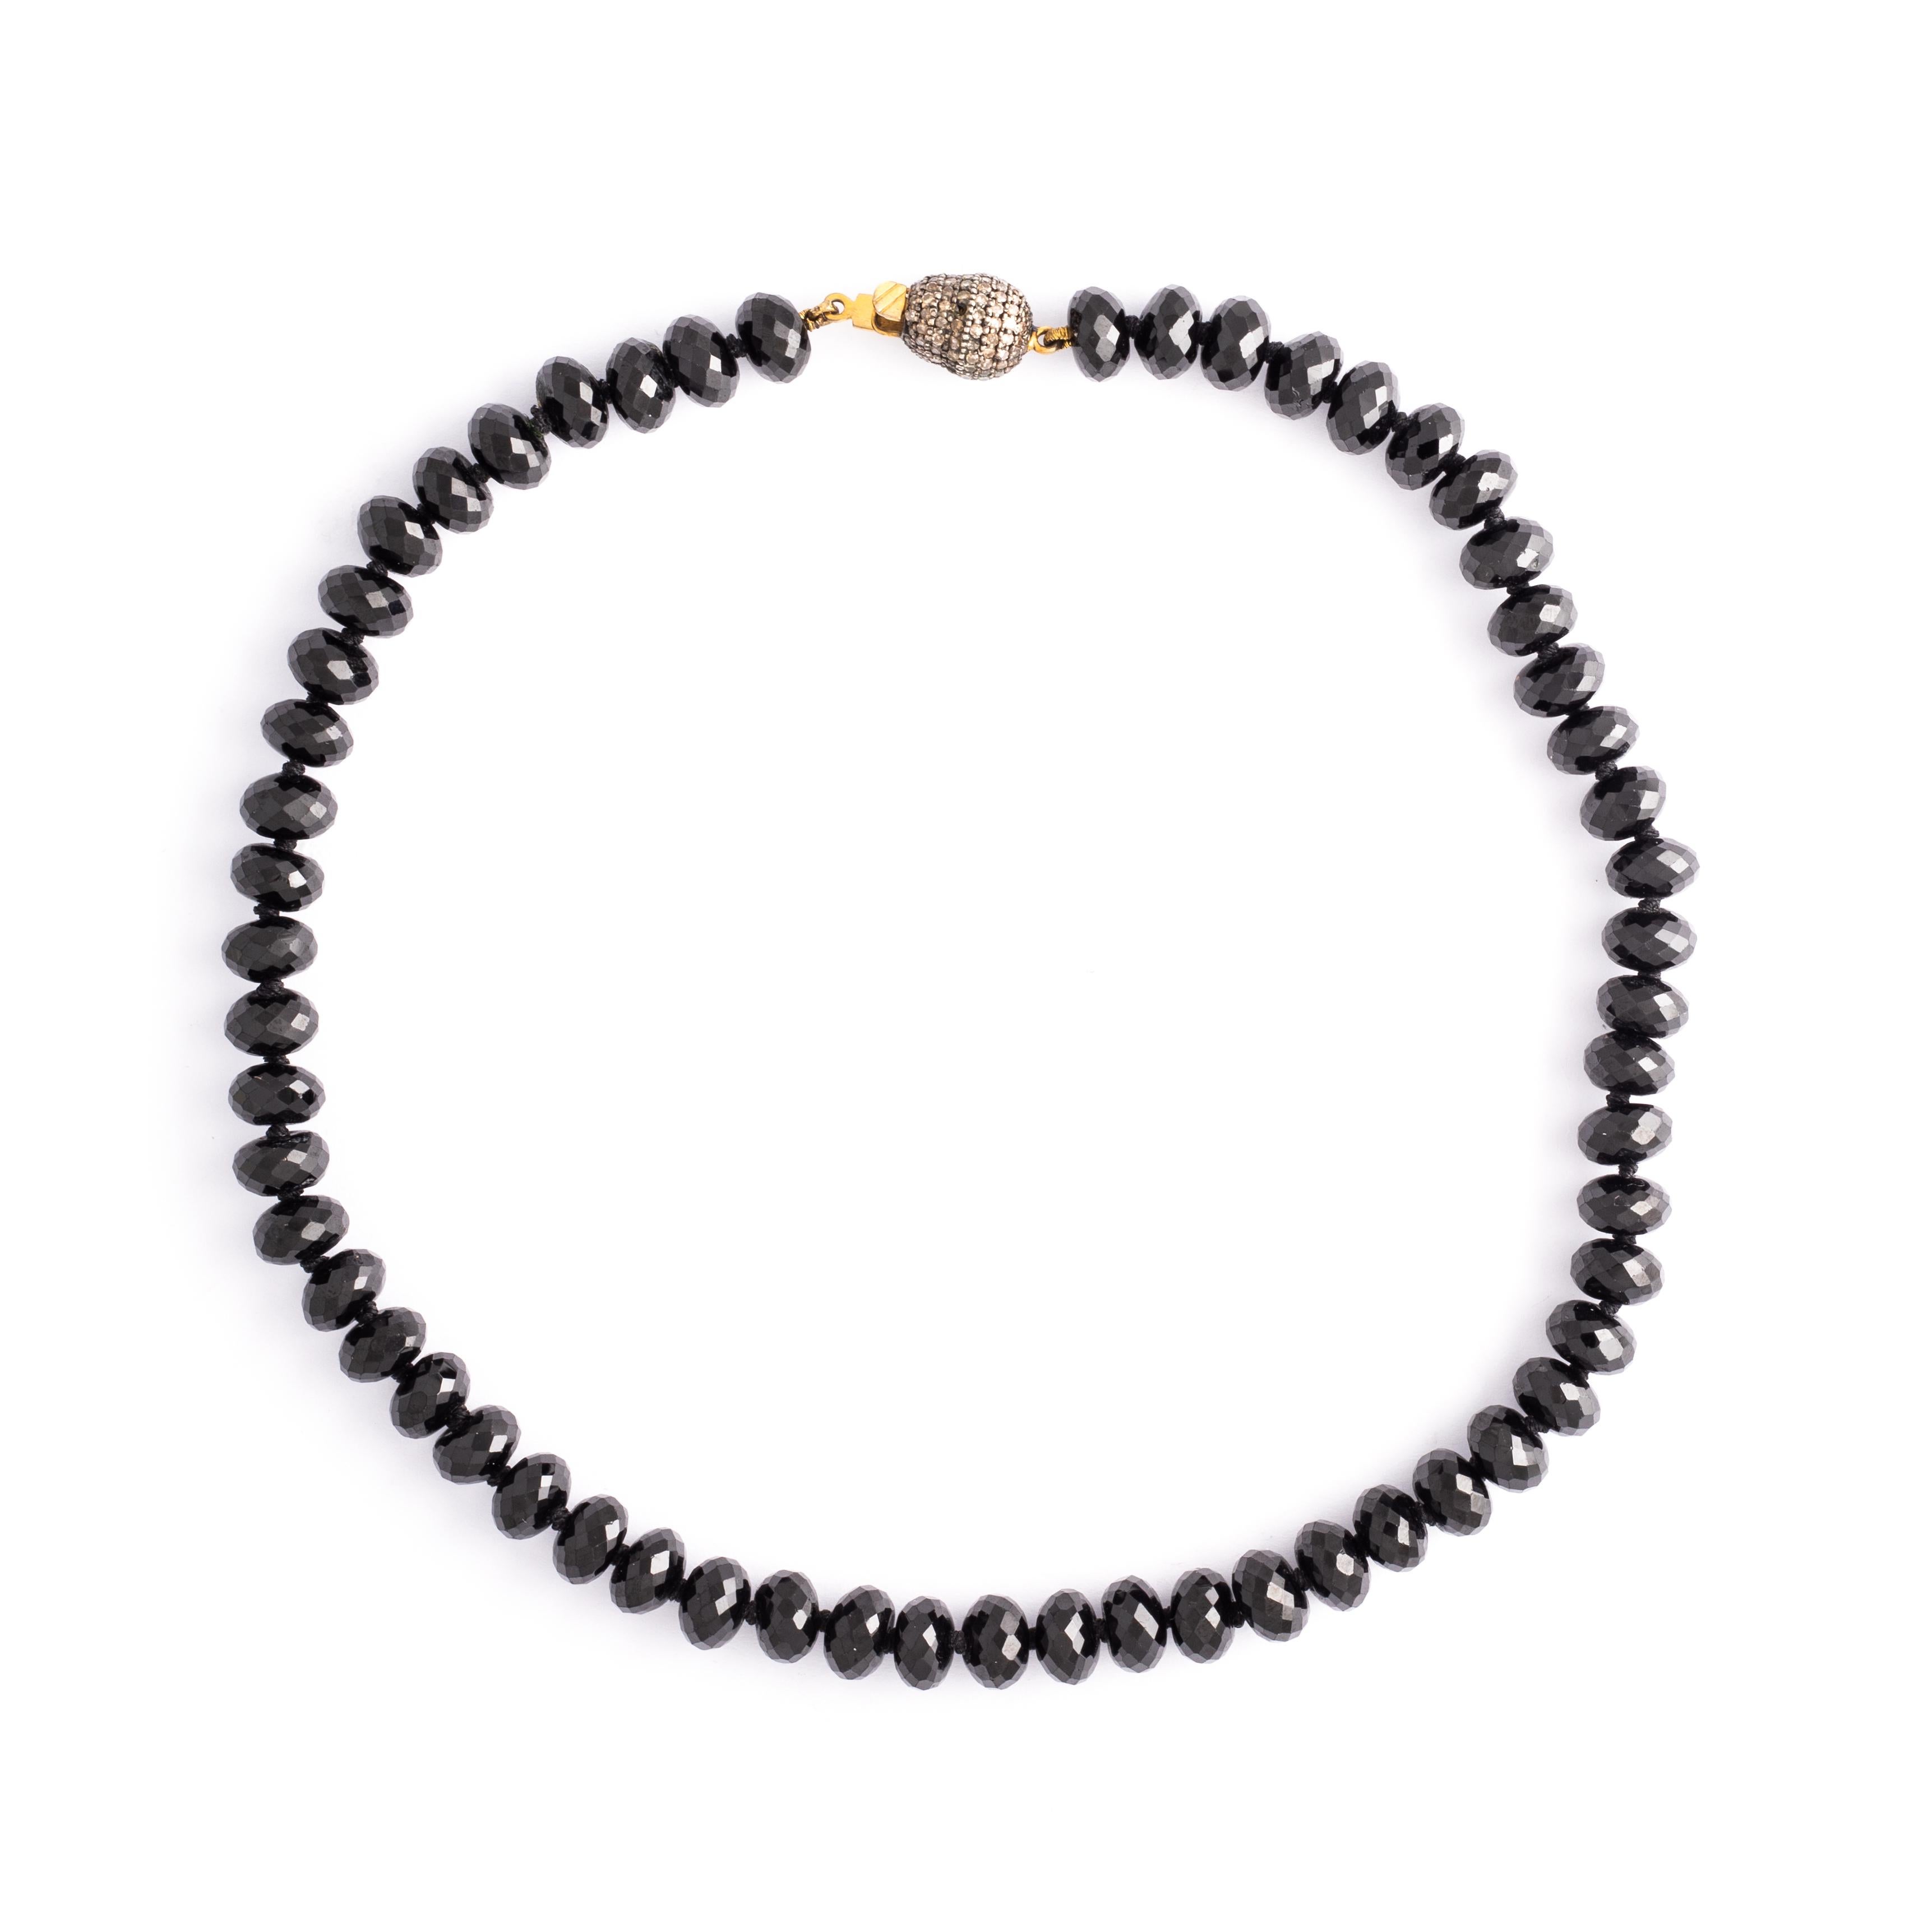 Brown Diamond Clasp Onyx multi facets Beaded Necklace.

Total length: approximately 16.14 inches (41.00 centimeters).
Total weight: 61.78 grams.